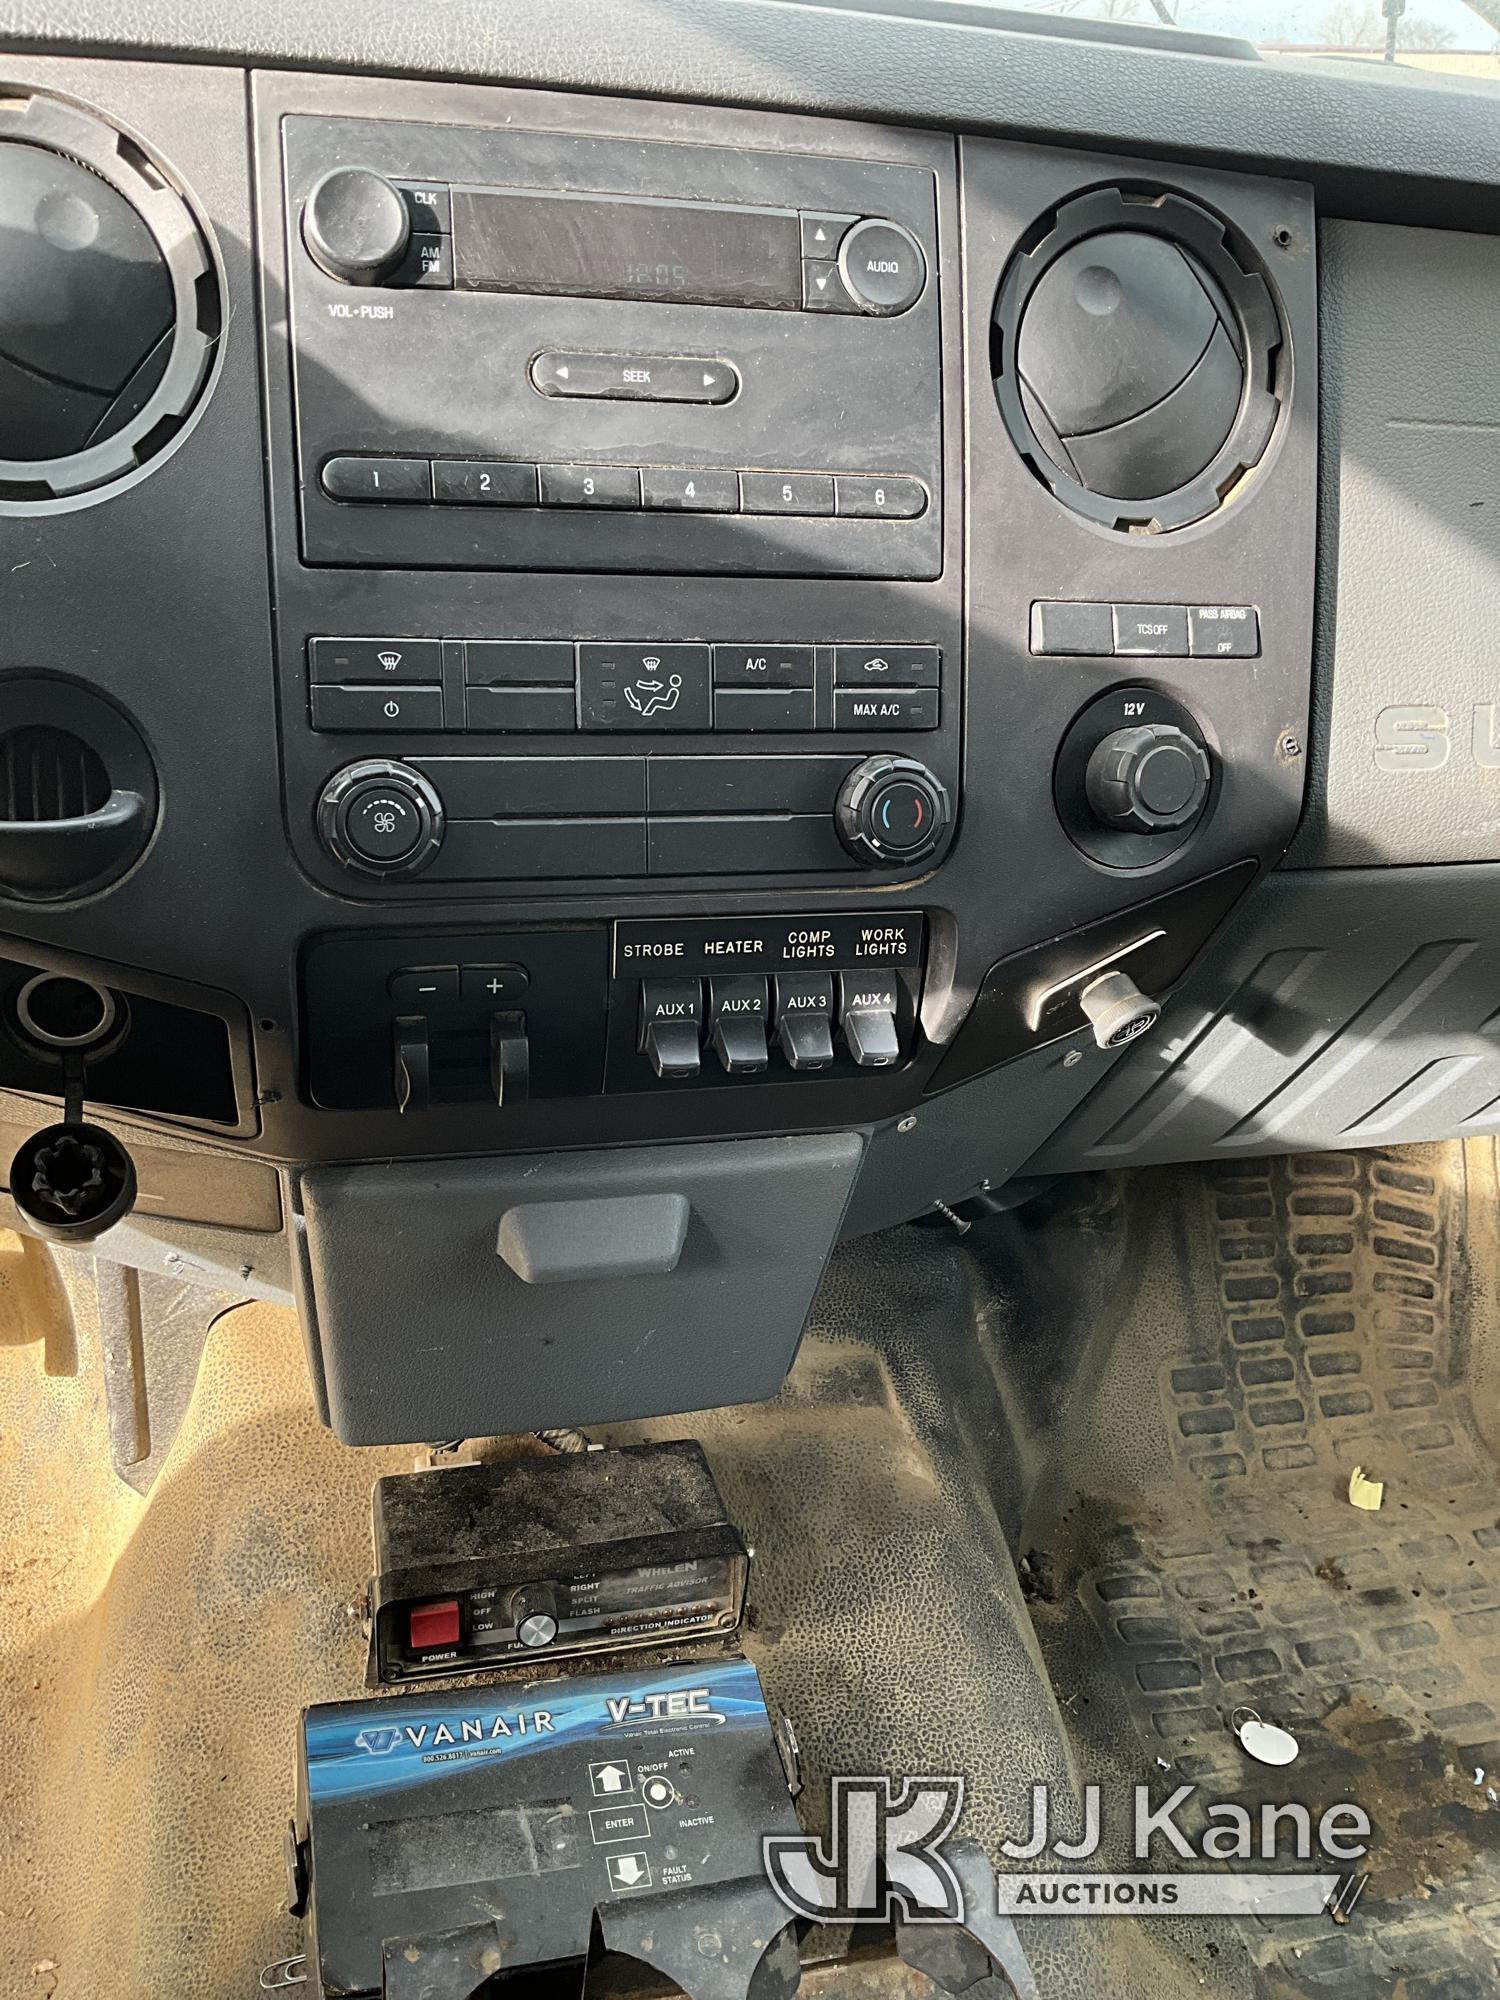 (South Beloit, IL) 2011 Ford F-550 Enclosed Service Truck Not Running, Condition Unknown.